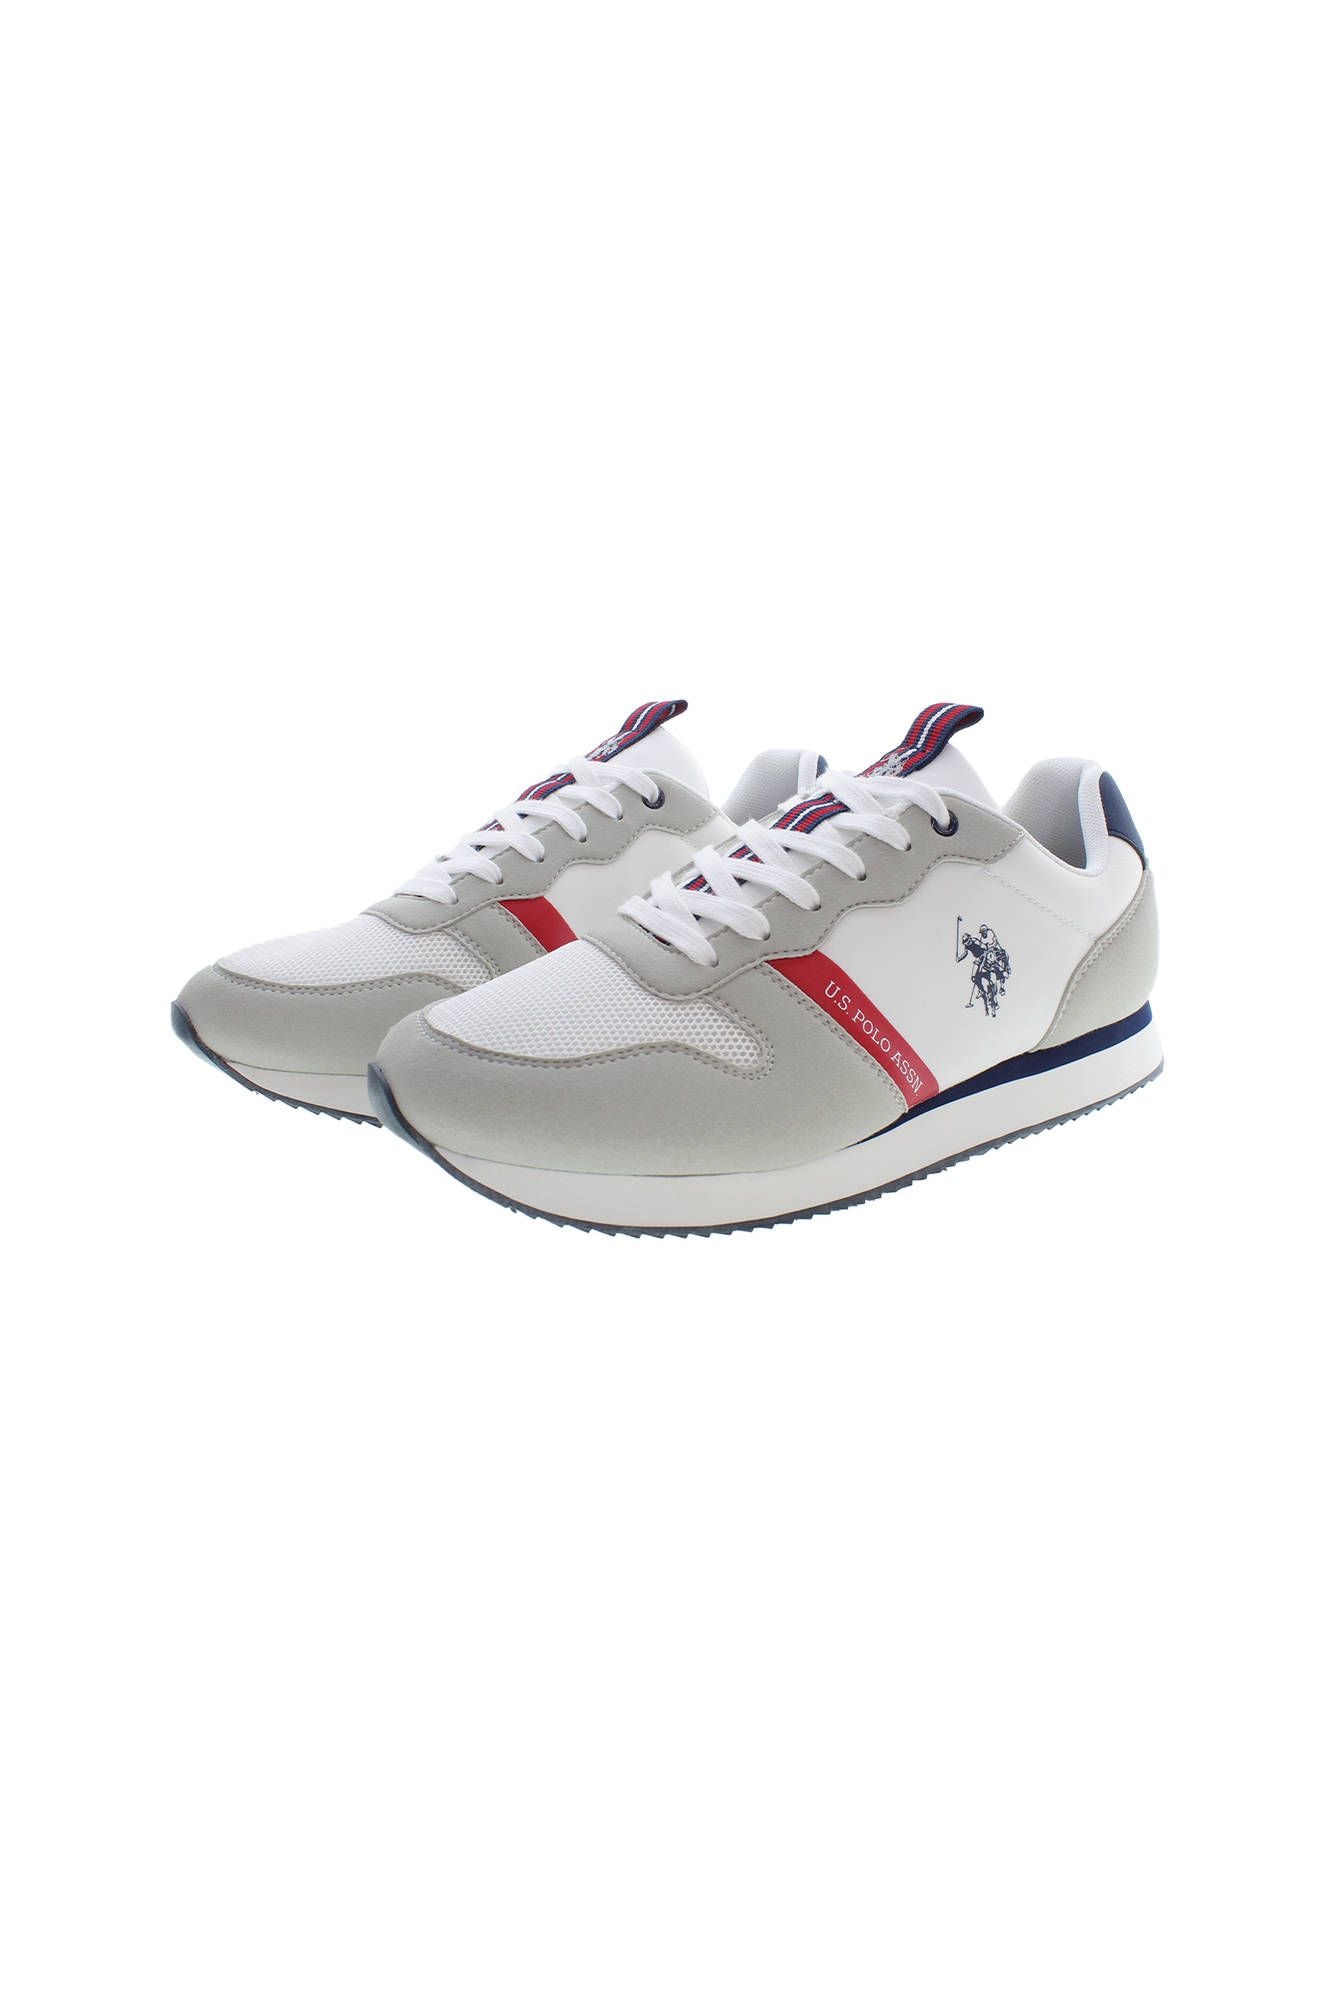 U.S. POLO ASSN. Sleek White Sneakers with Contrast Detailing